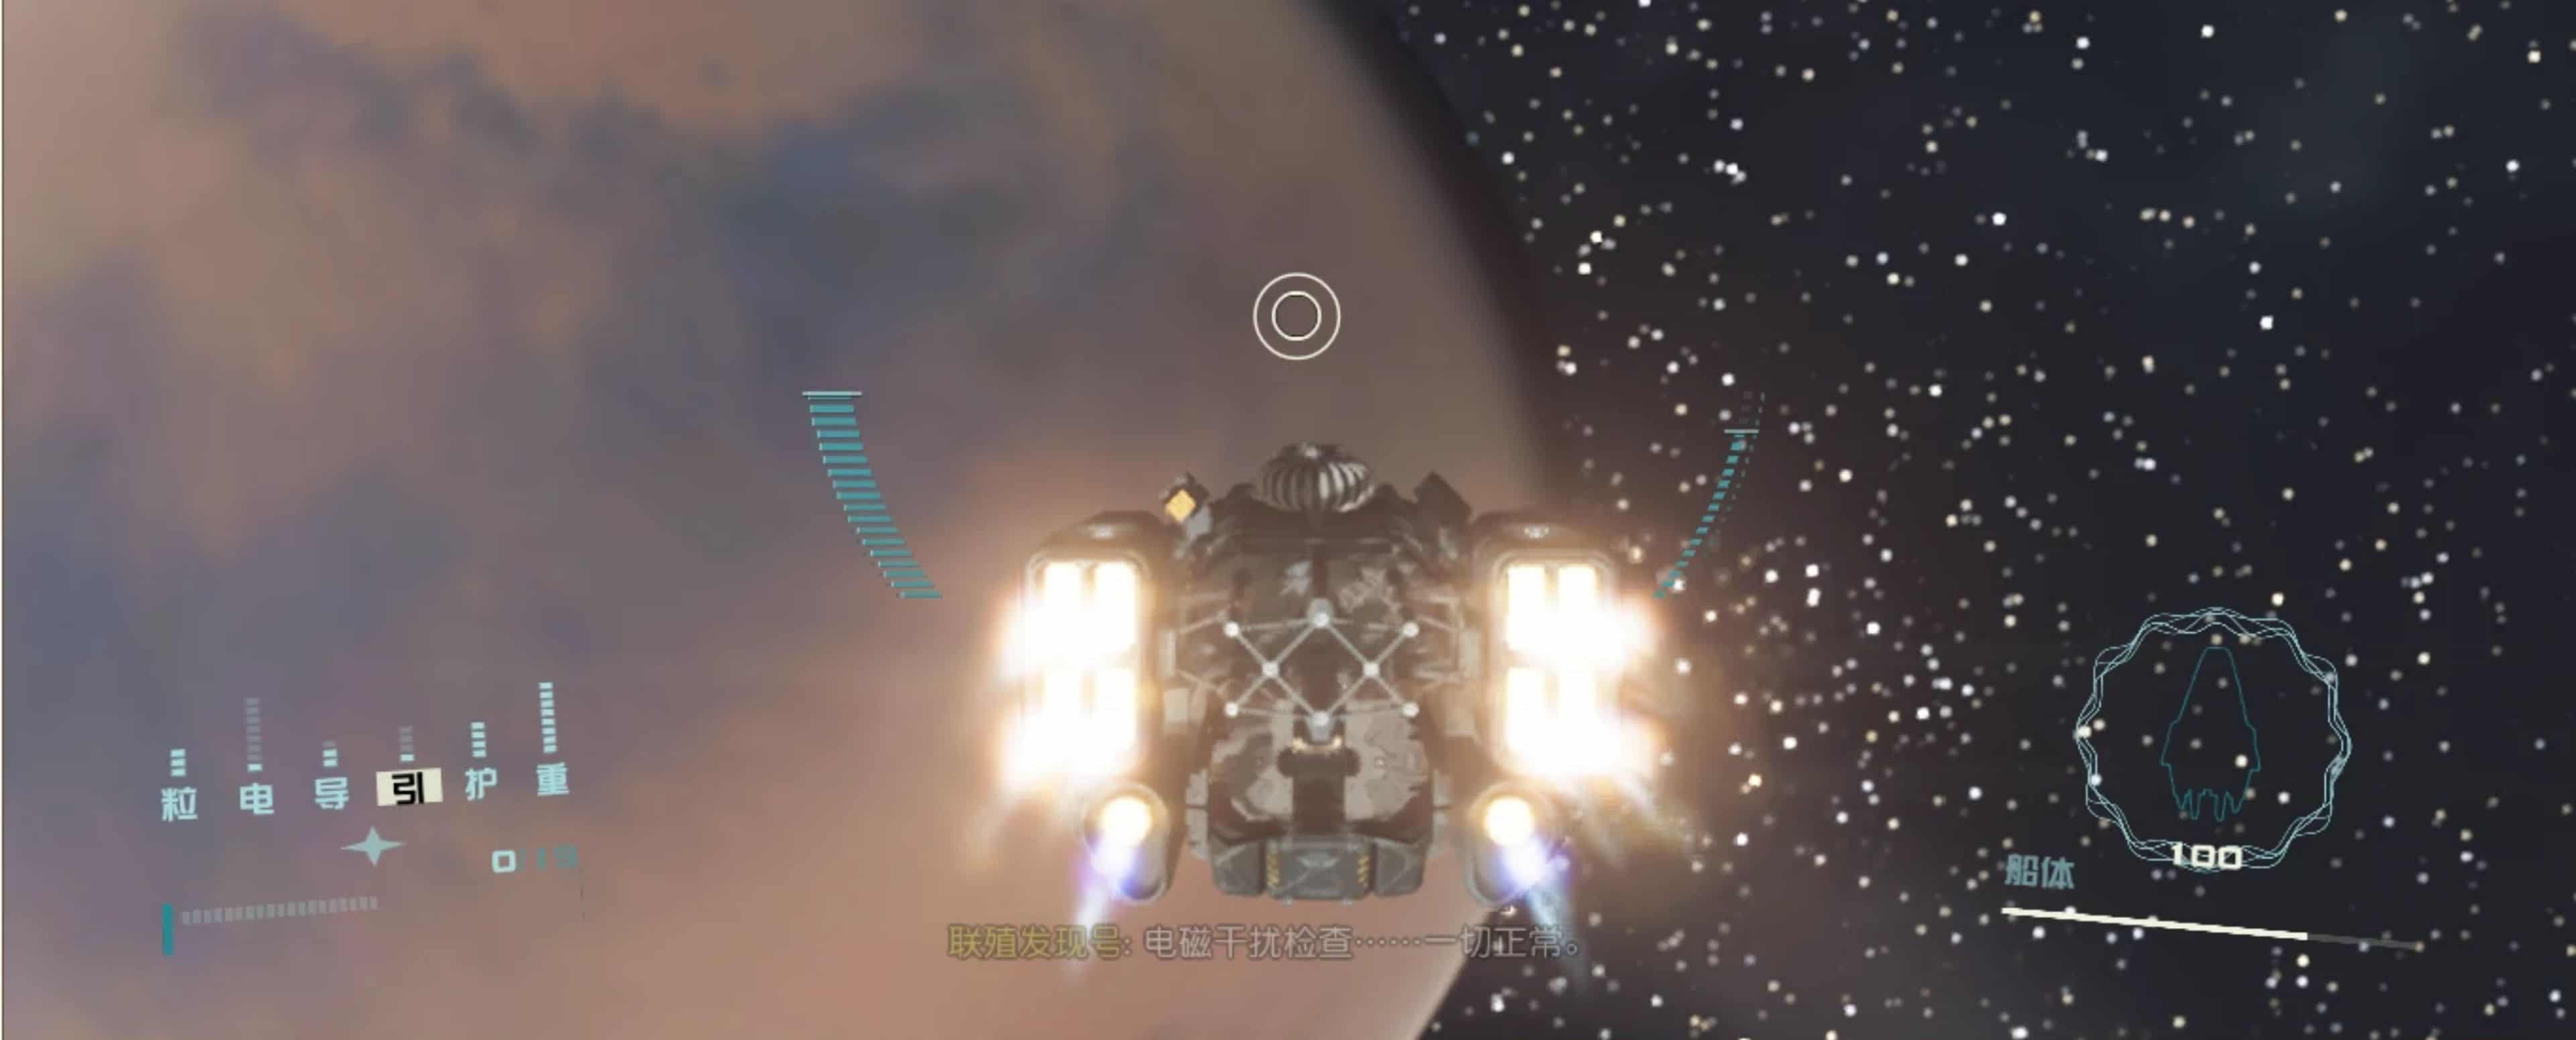 Q's clean ship hud -shield and power | Starfield Mod Download